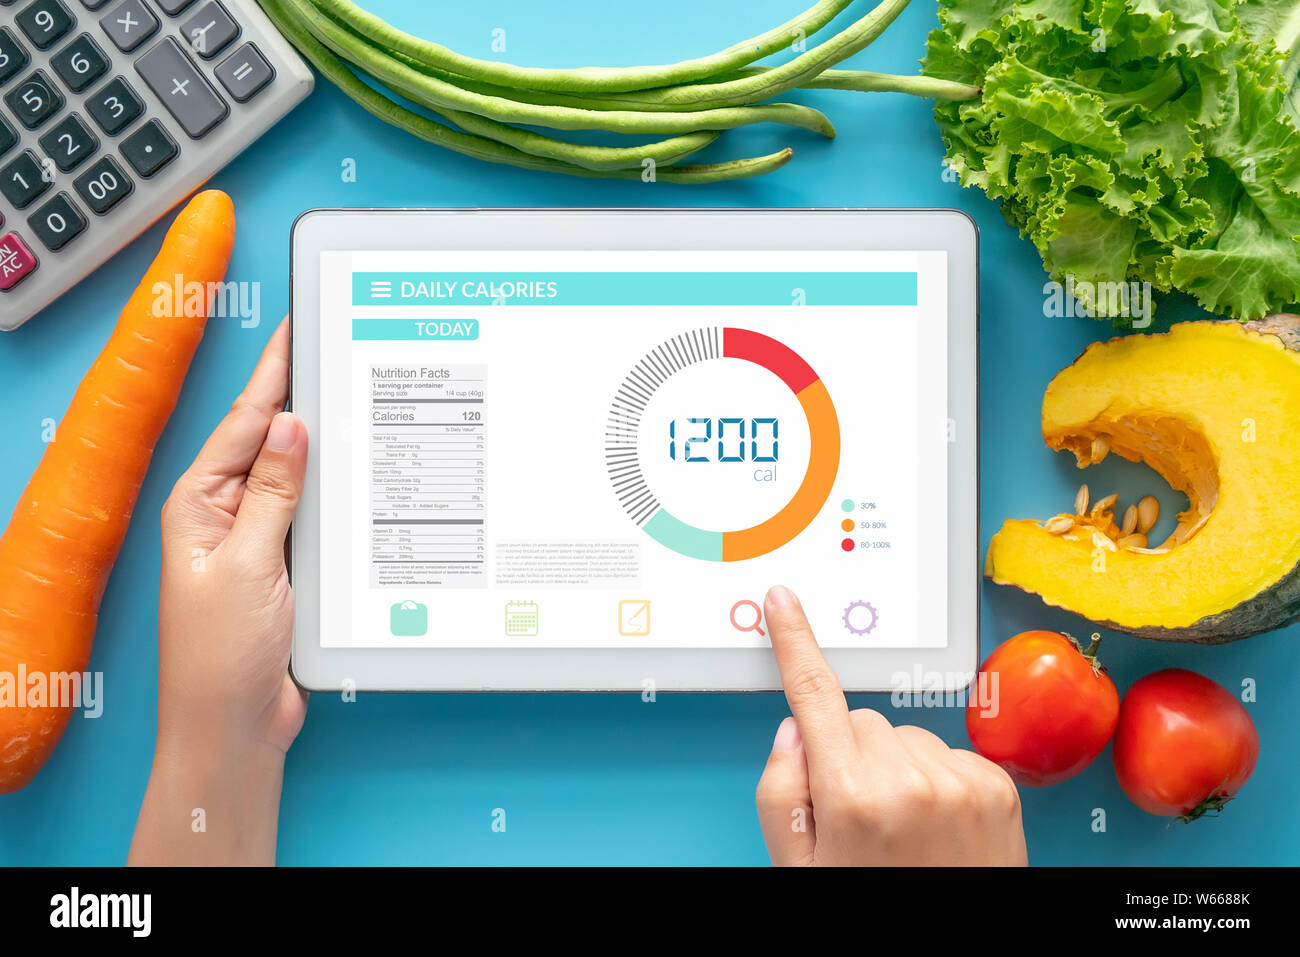 Calories counting , diet , food control and weight loss concept. woman using Calorie counter application on tablet at dining table with fresh vegetabl Stock Photo